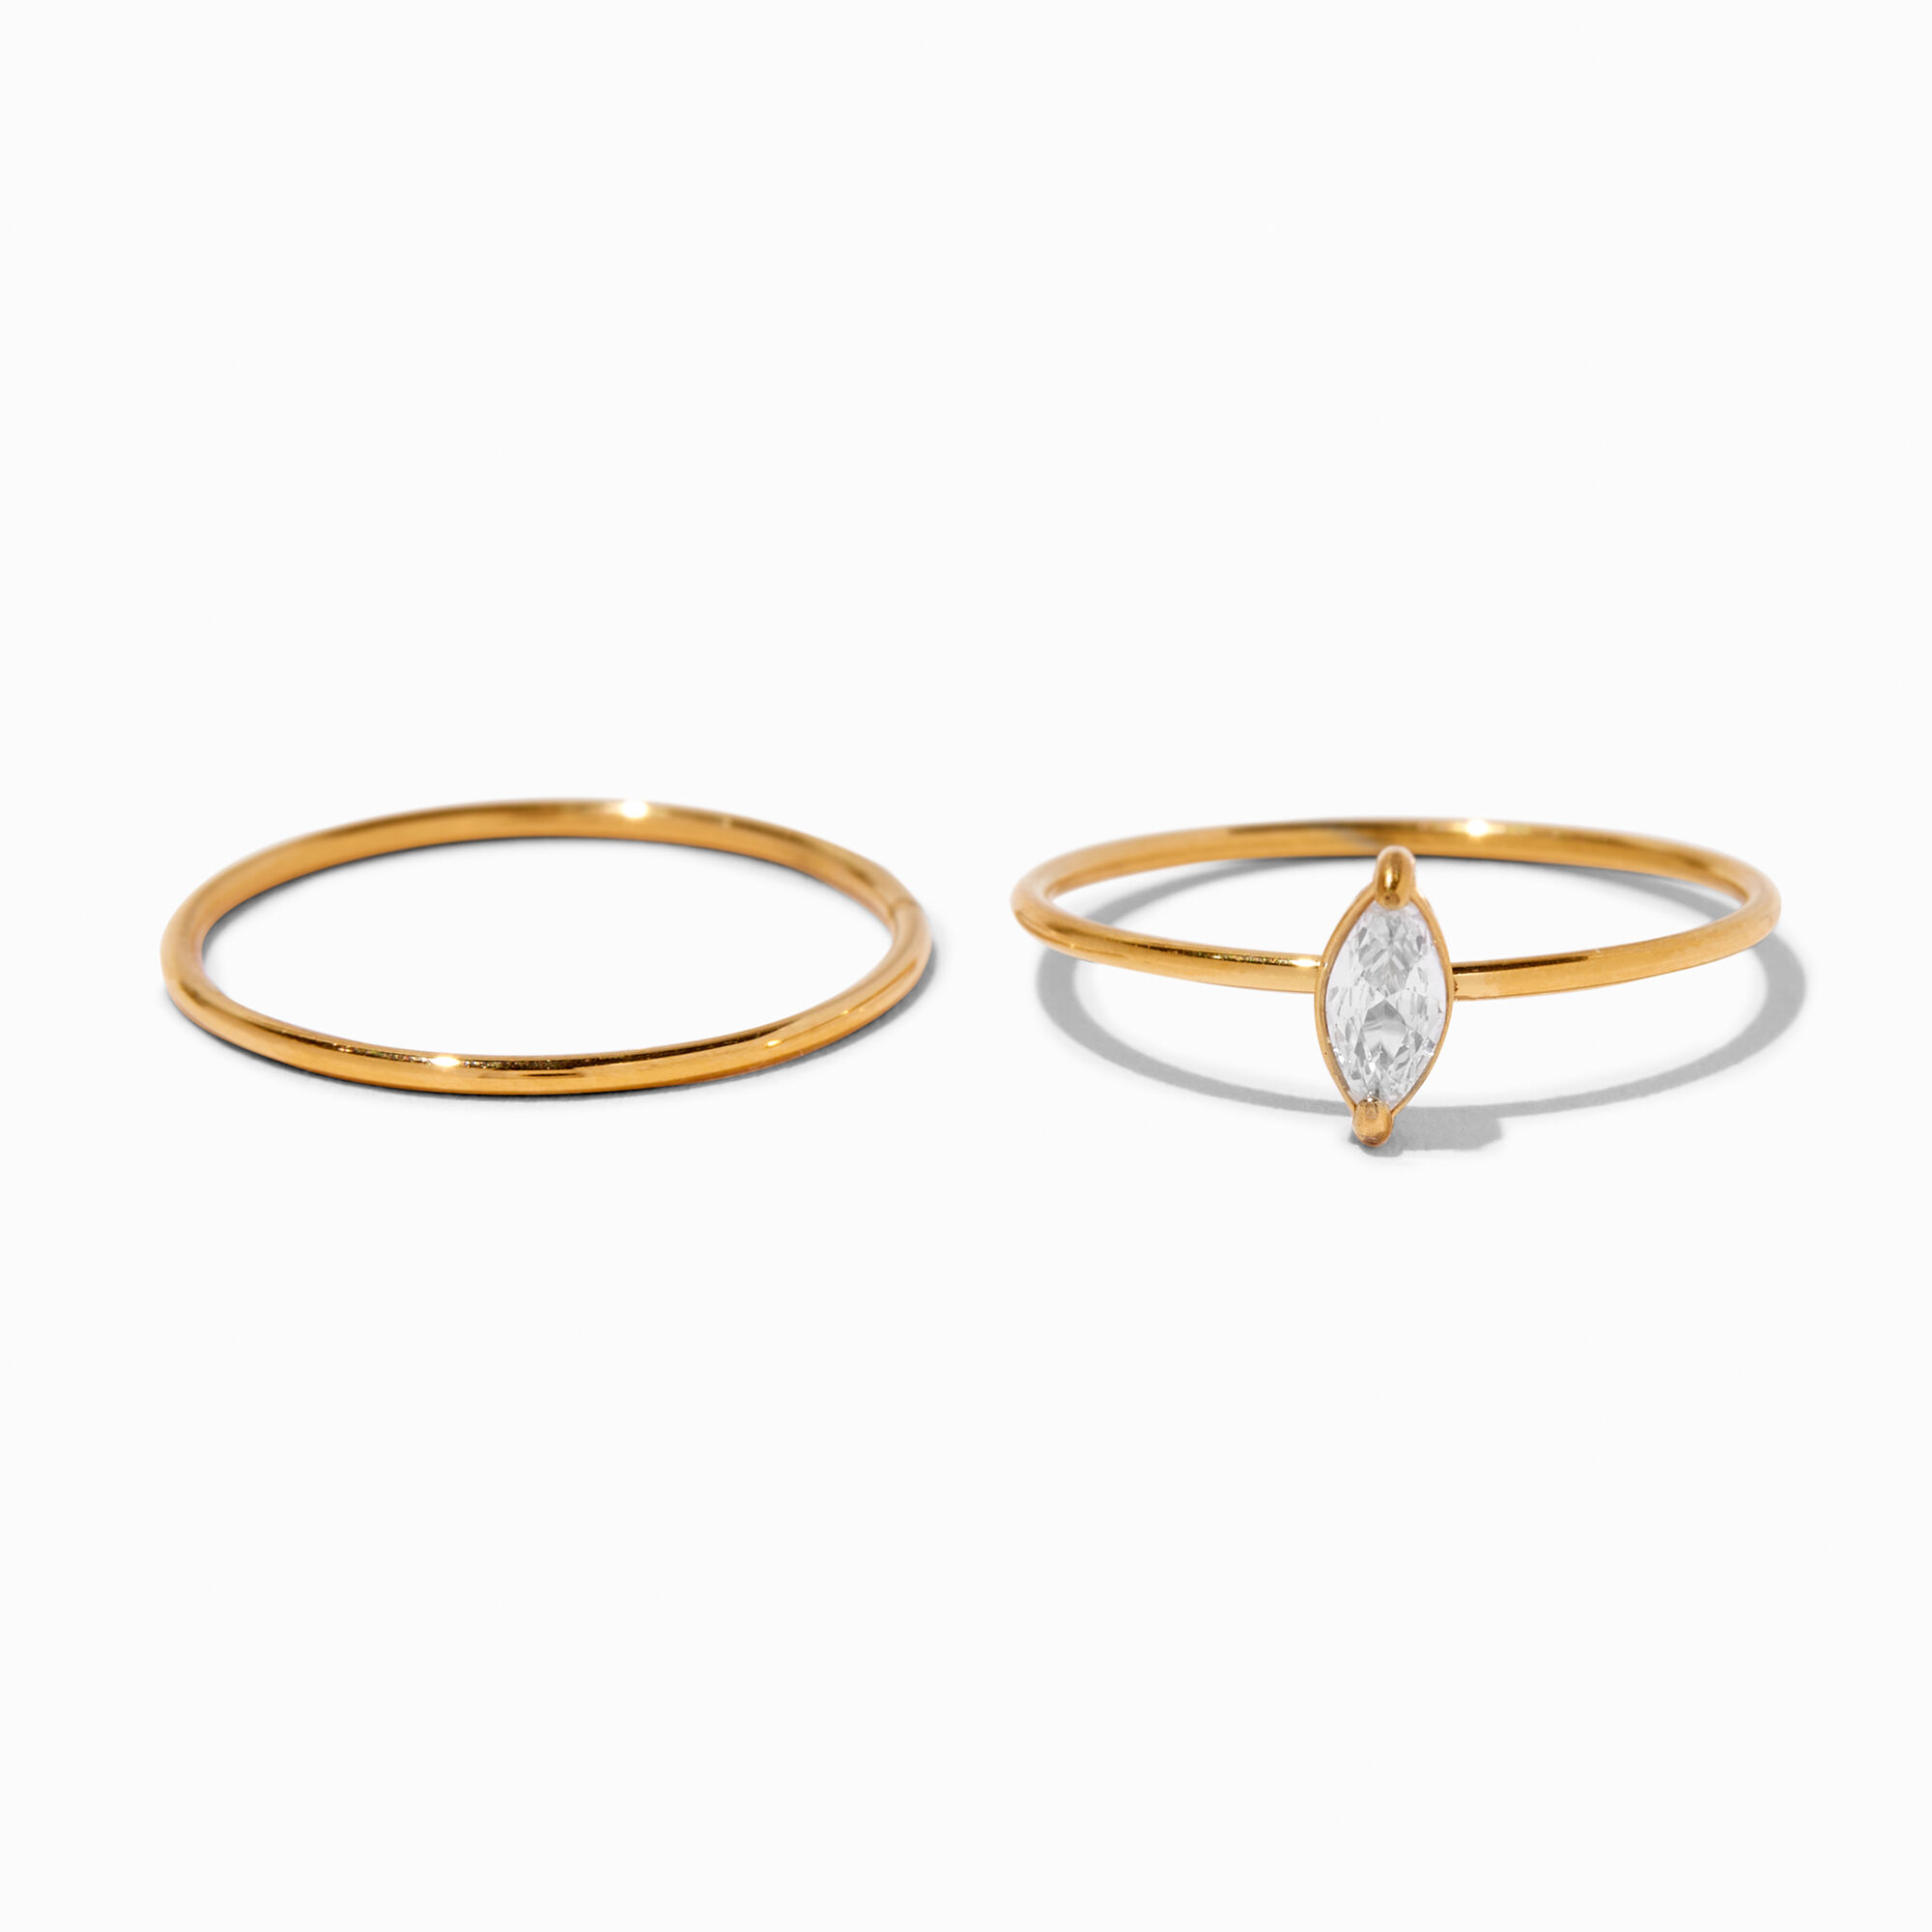 View Claires Tone Stainless Steel Cubic Zirconia Marquise Ring Set 2 Pack Gold information